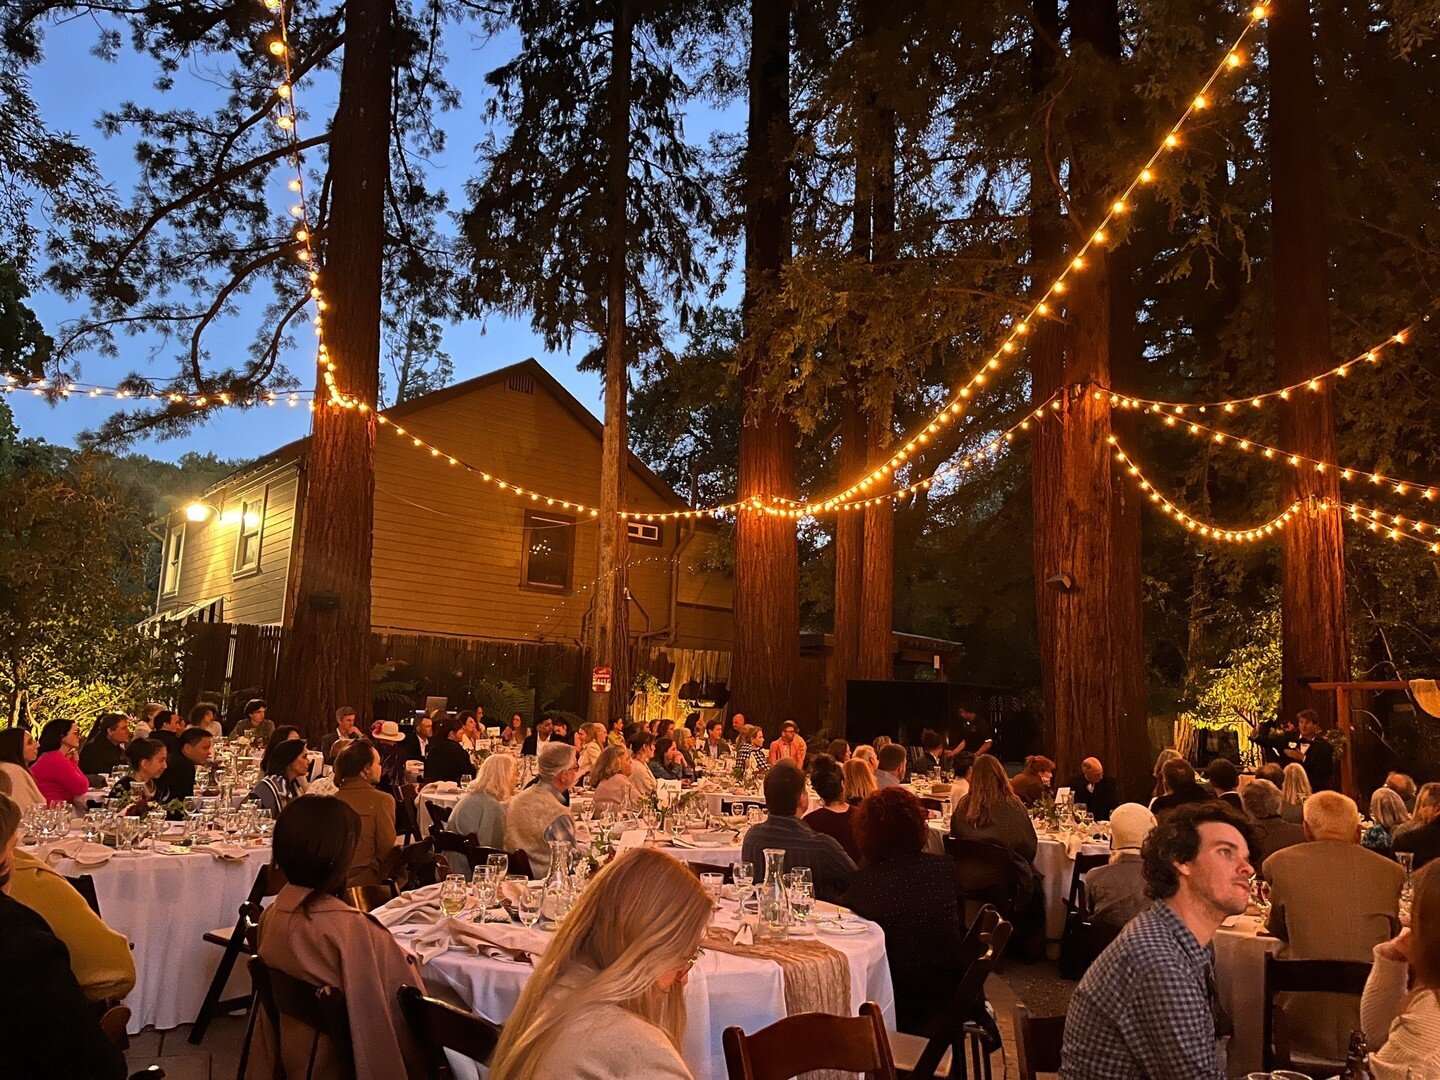 It was a beautiful night! Thank you to everyone who joined us on this very special occasion... and stay tuned for more pictures from our 50th anniversary gala, From Seed to Grove. #waldorfinspired #waldorfschool #waldorfeducation #marincounty